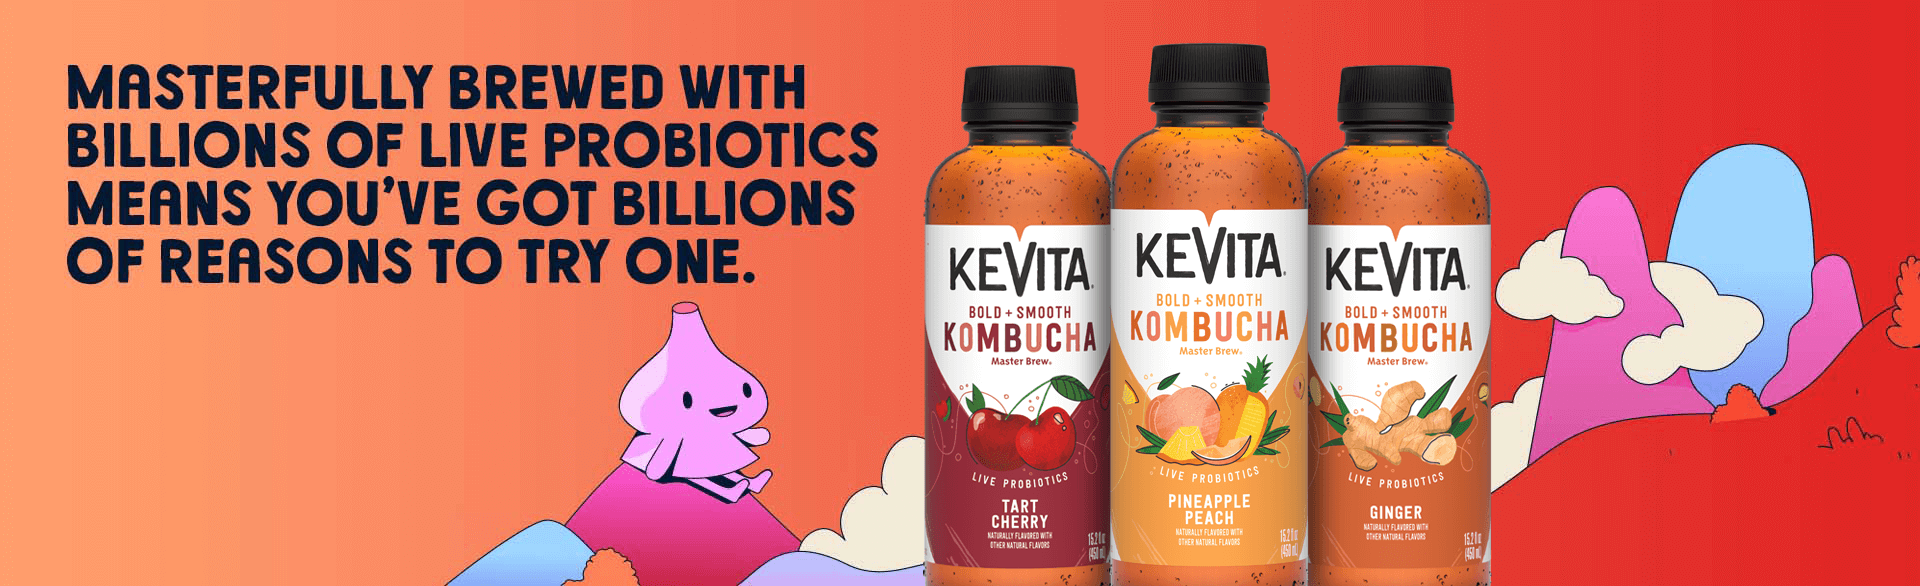 Masterfully Brewed with Billions of Live Probiotics Means You've Got Billions of Reasons to Try One